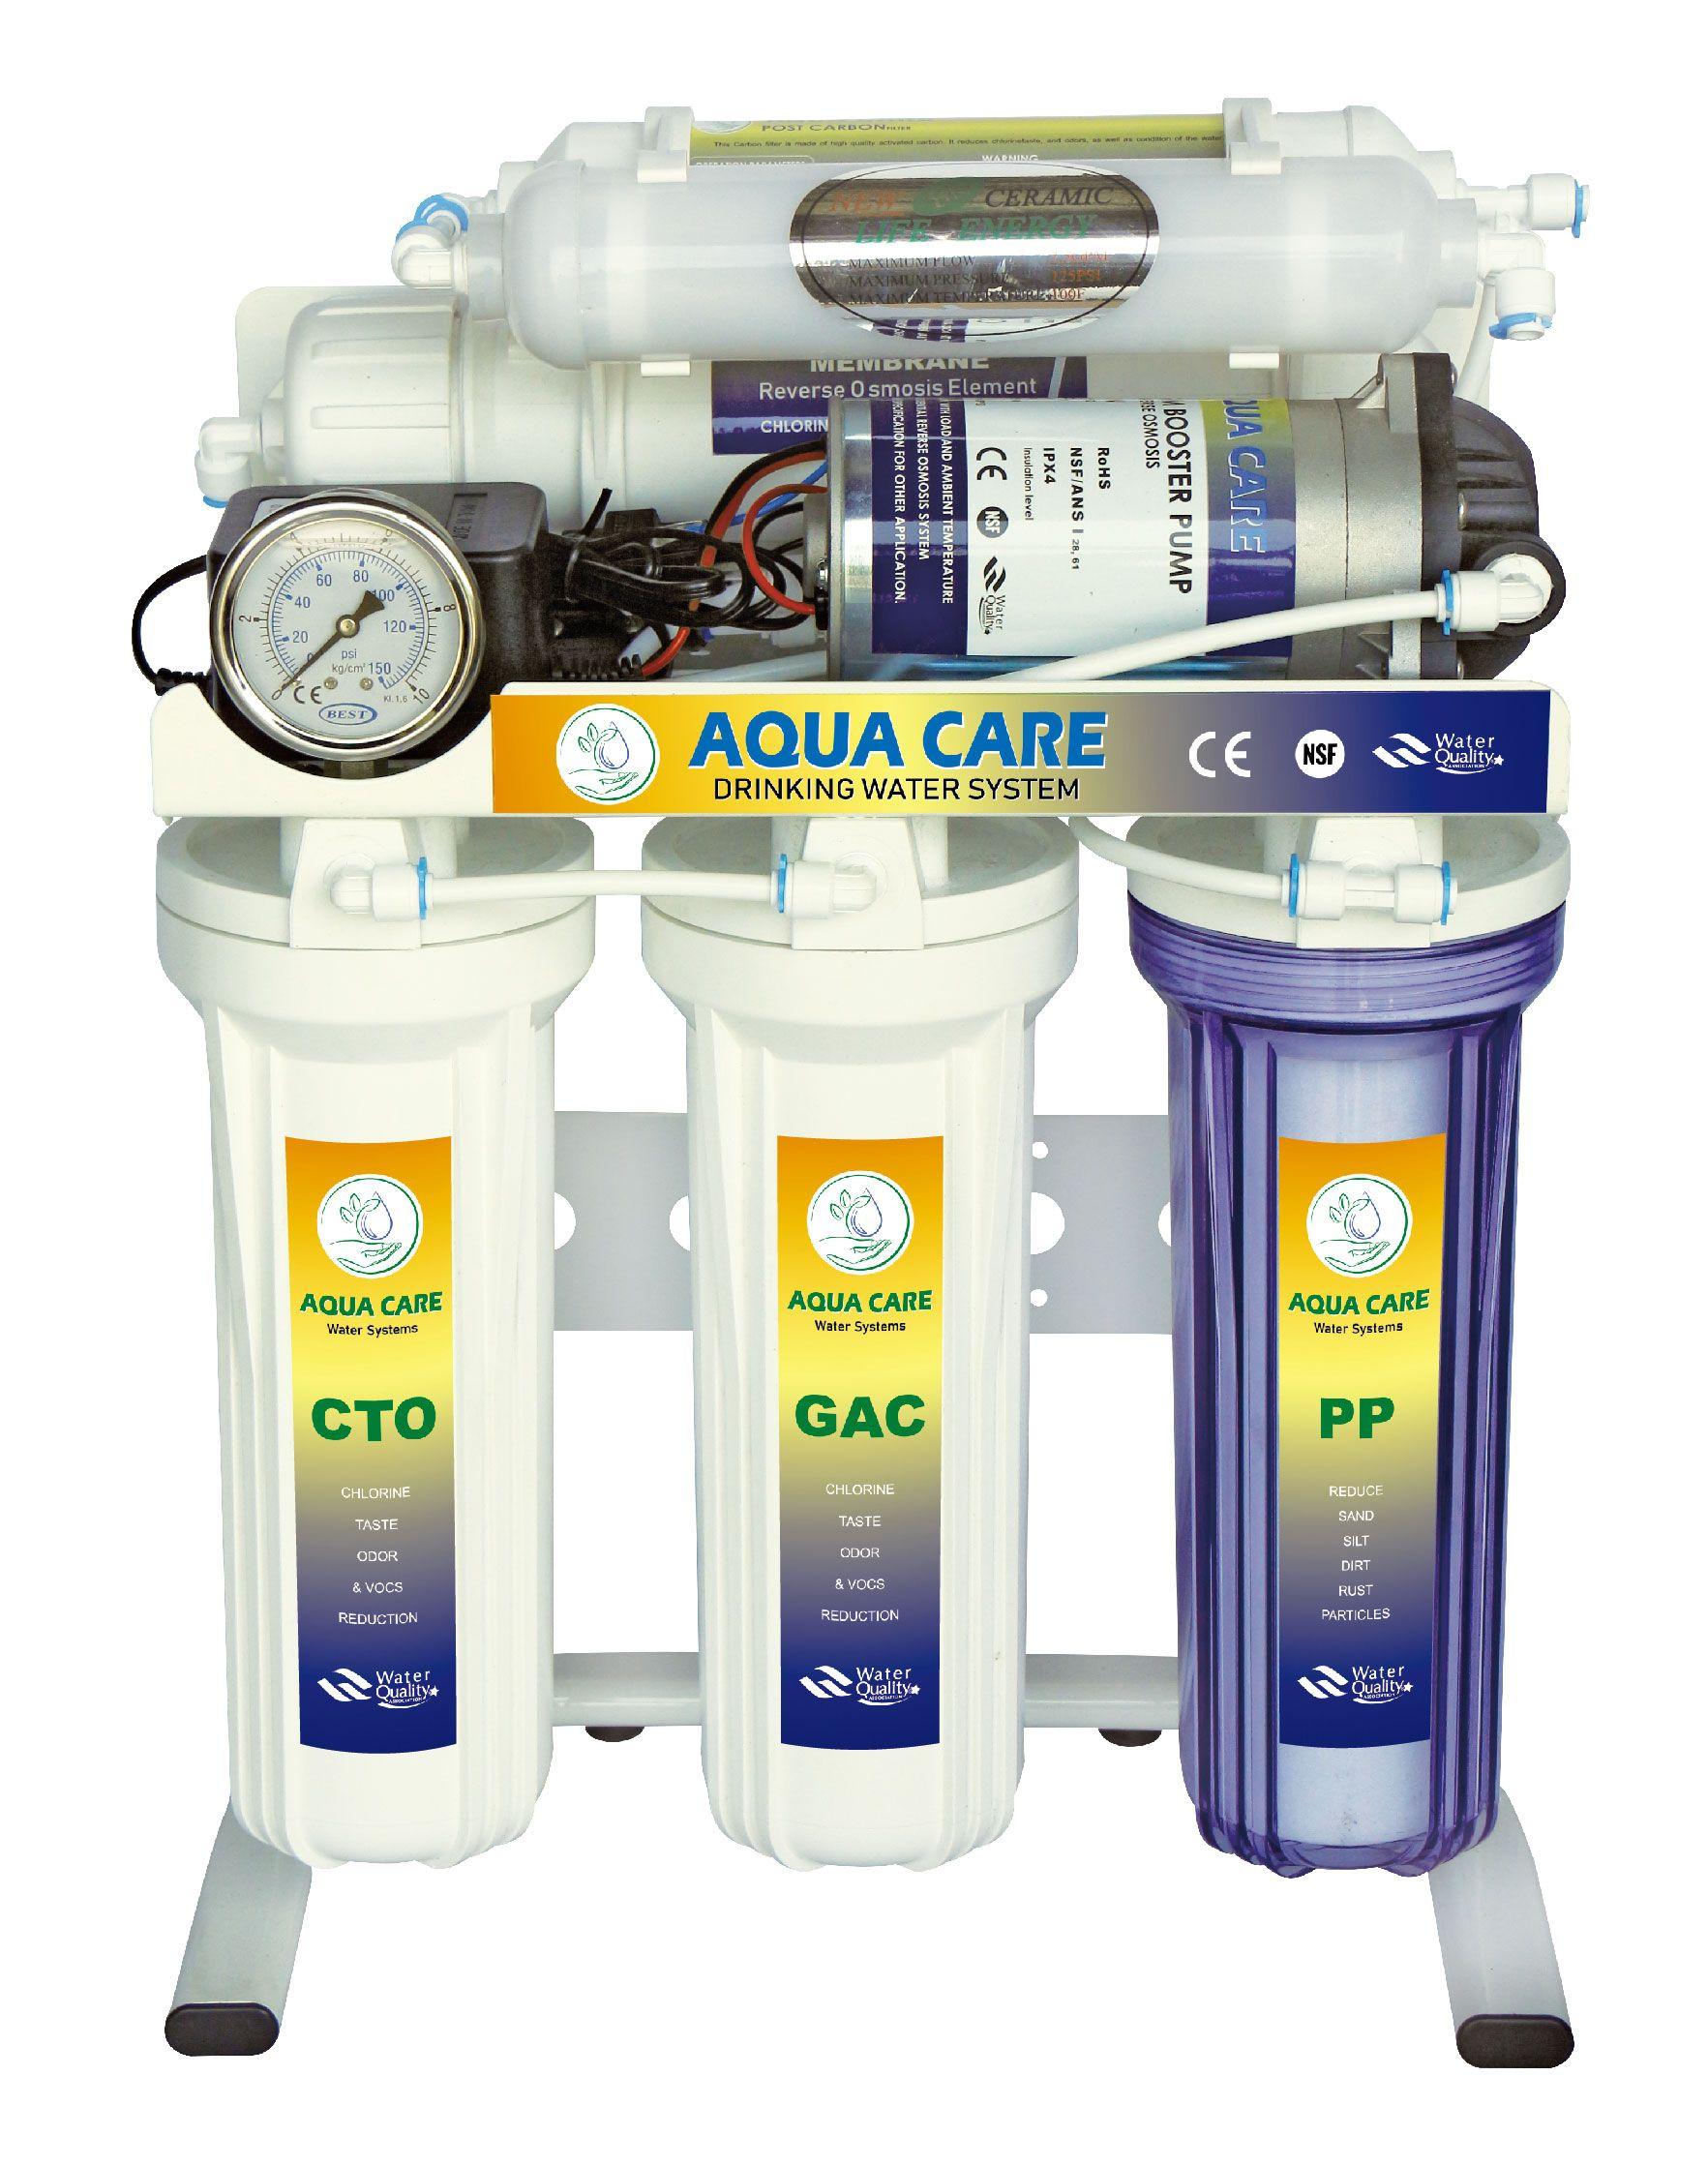 Product RO Water Filter | Water Purifier Systems in Dubai Sharjah - UAE image